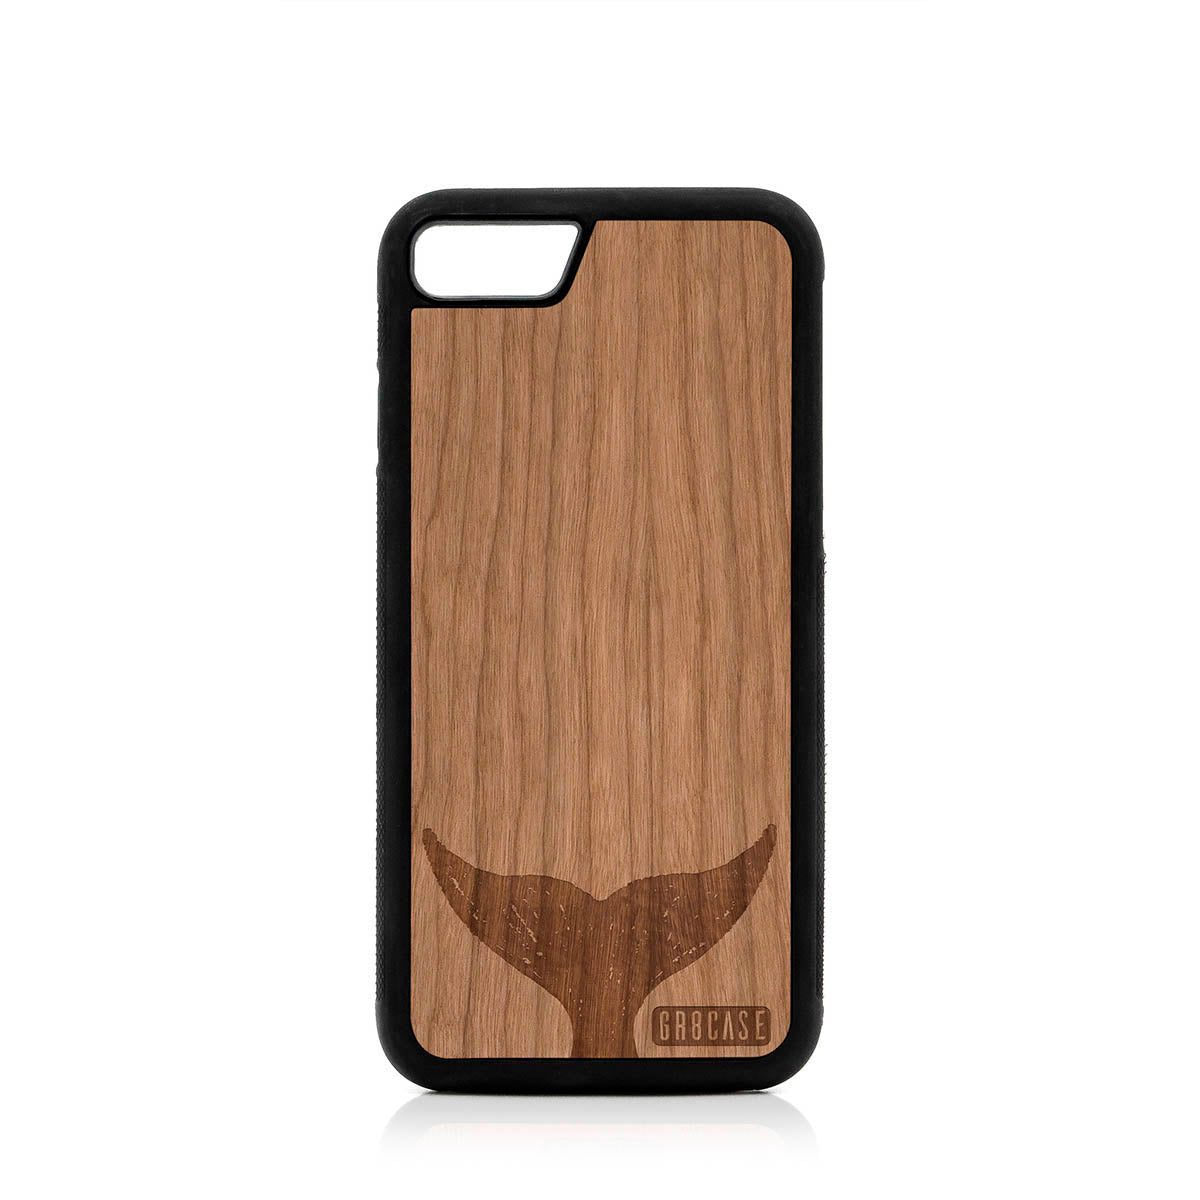 Whale Tail Design Wood Case For iPhone 7/8